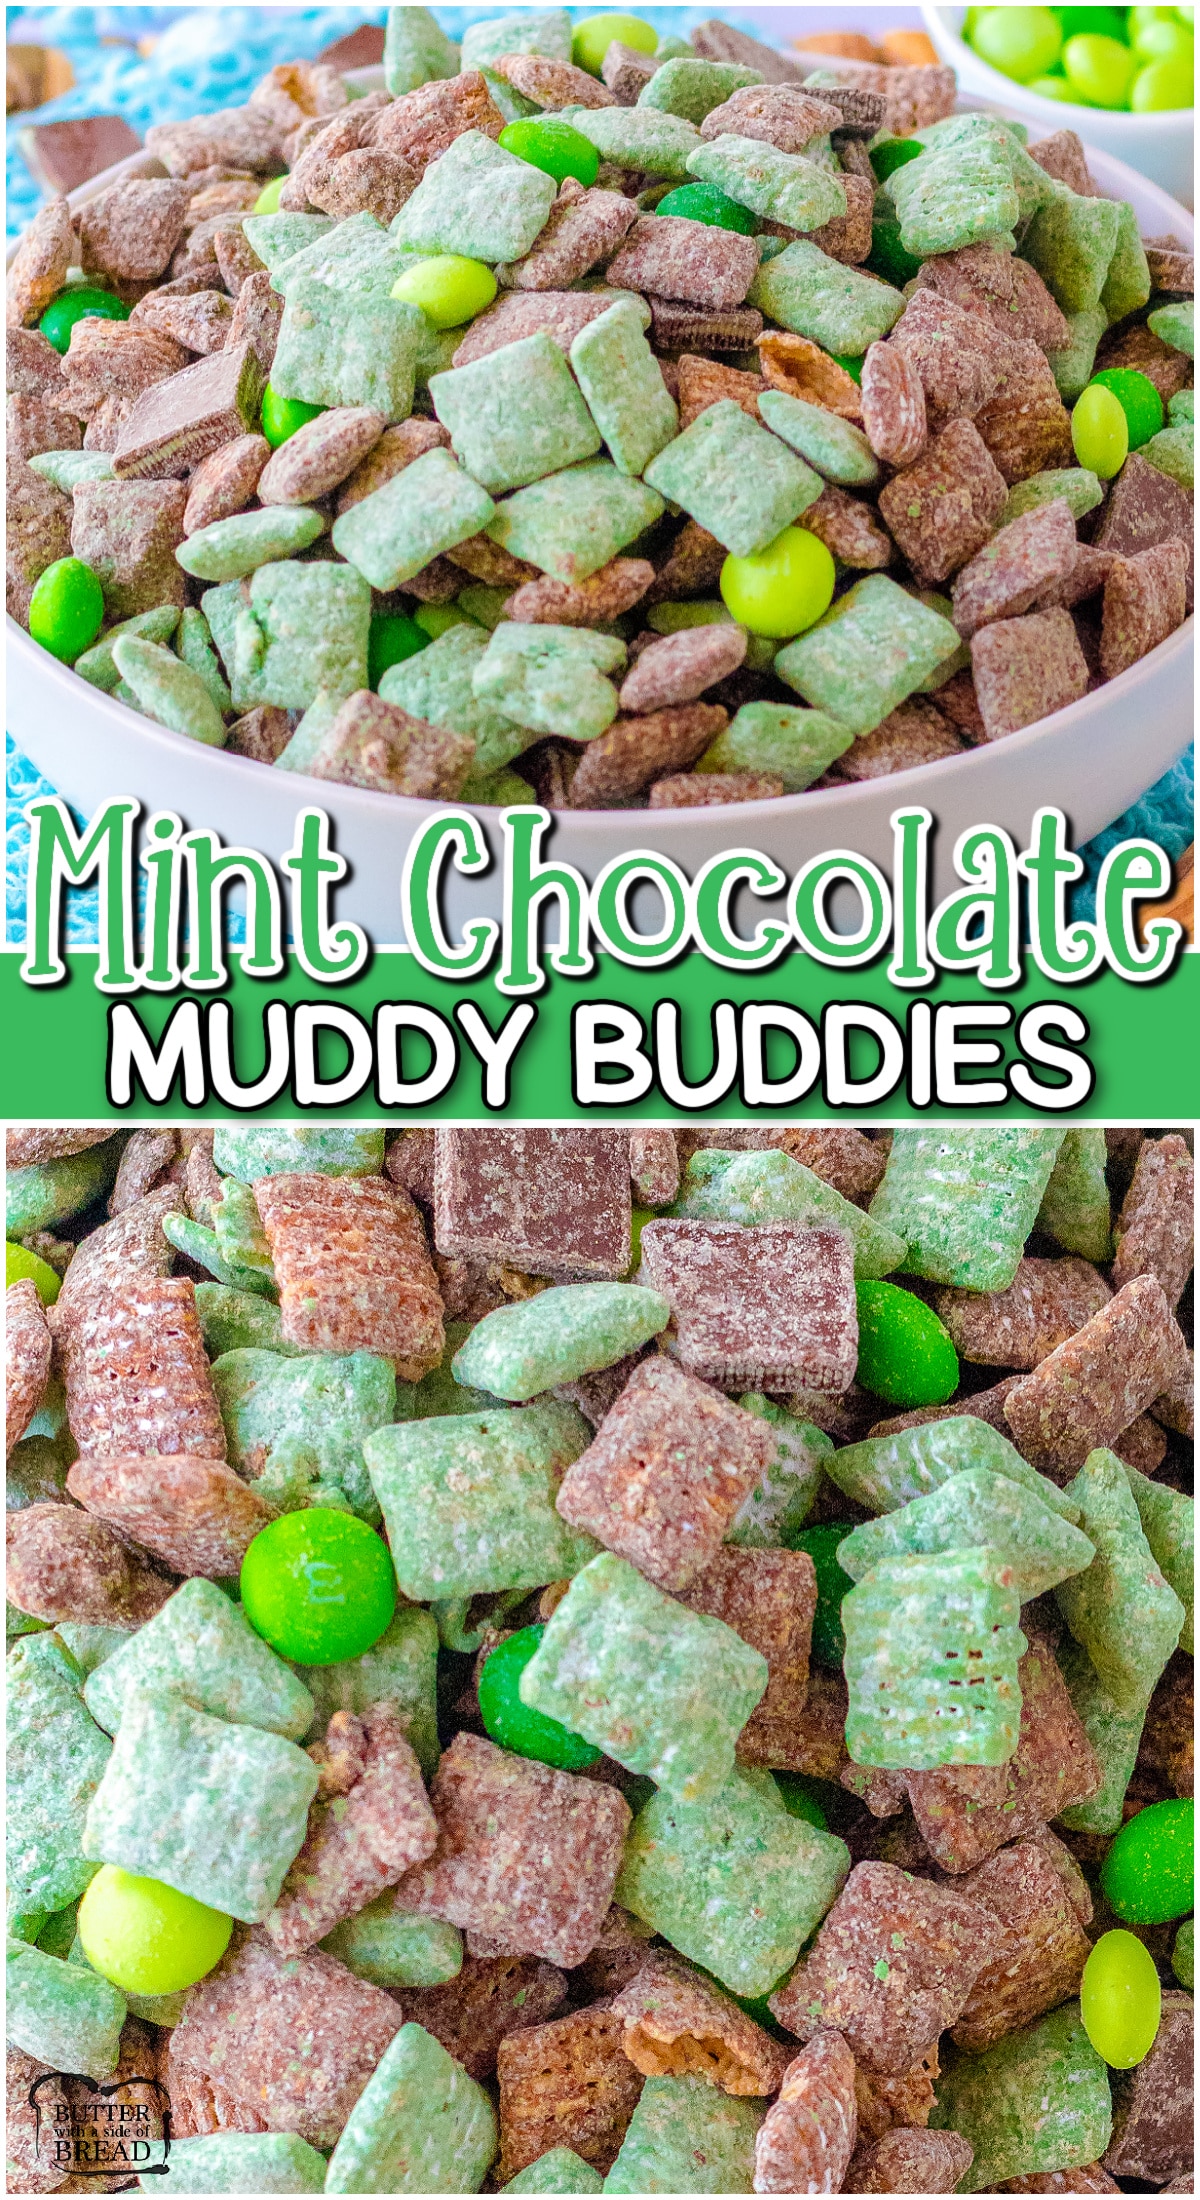 Green Mint Chocolate Muddy Buddies are a fun and festive treat to serve this St. Patrick's Day! Made easy with Chex cereal & mint M&Ms candy; you'll love the mint chocolate combination! 